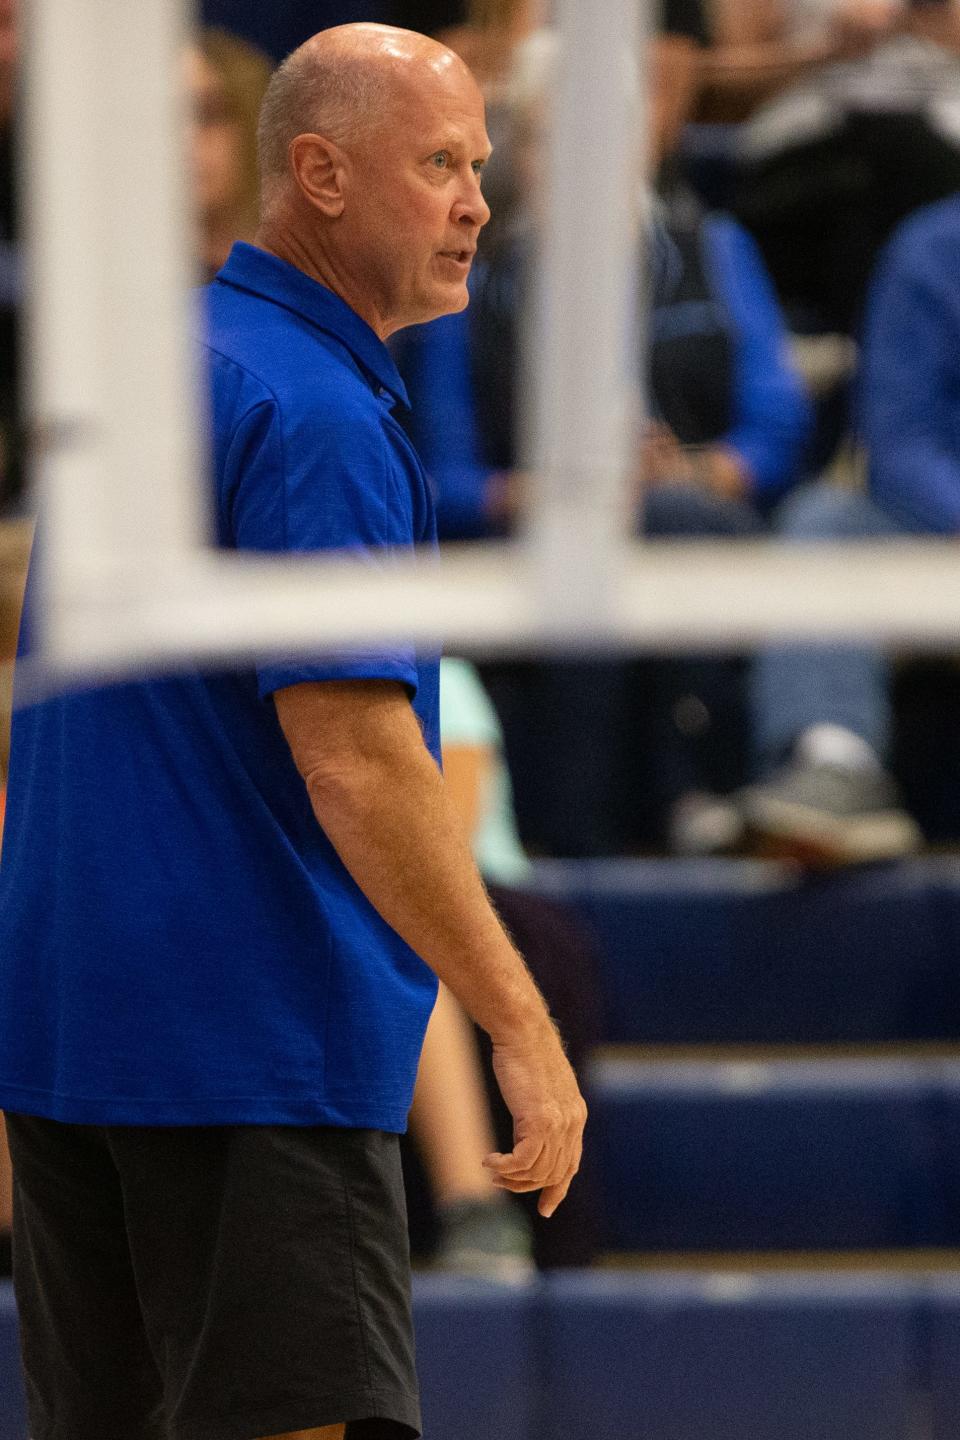 Kevin Bordewick and Washburn Rural are competing for their latest state title this weekend at the state volleyball tournament.
(Photo: Evert Nelson/The Capital-Journal)